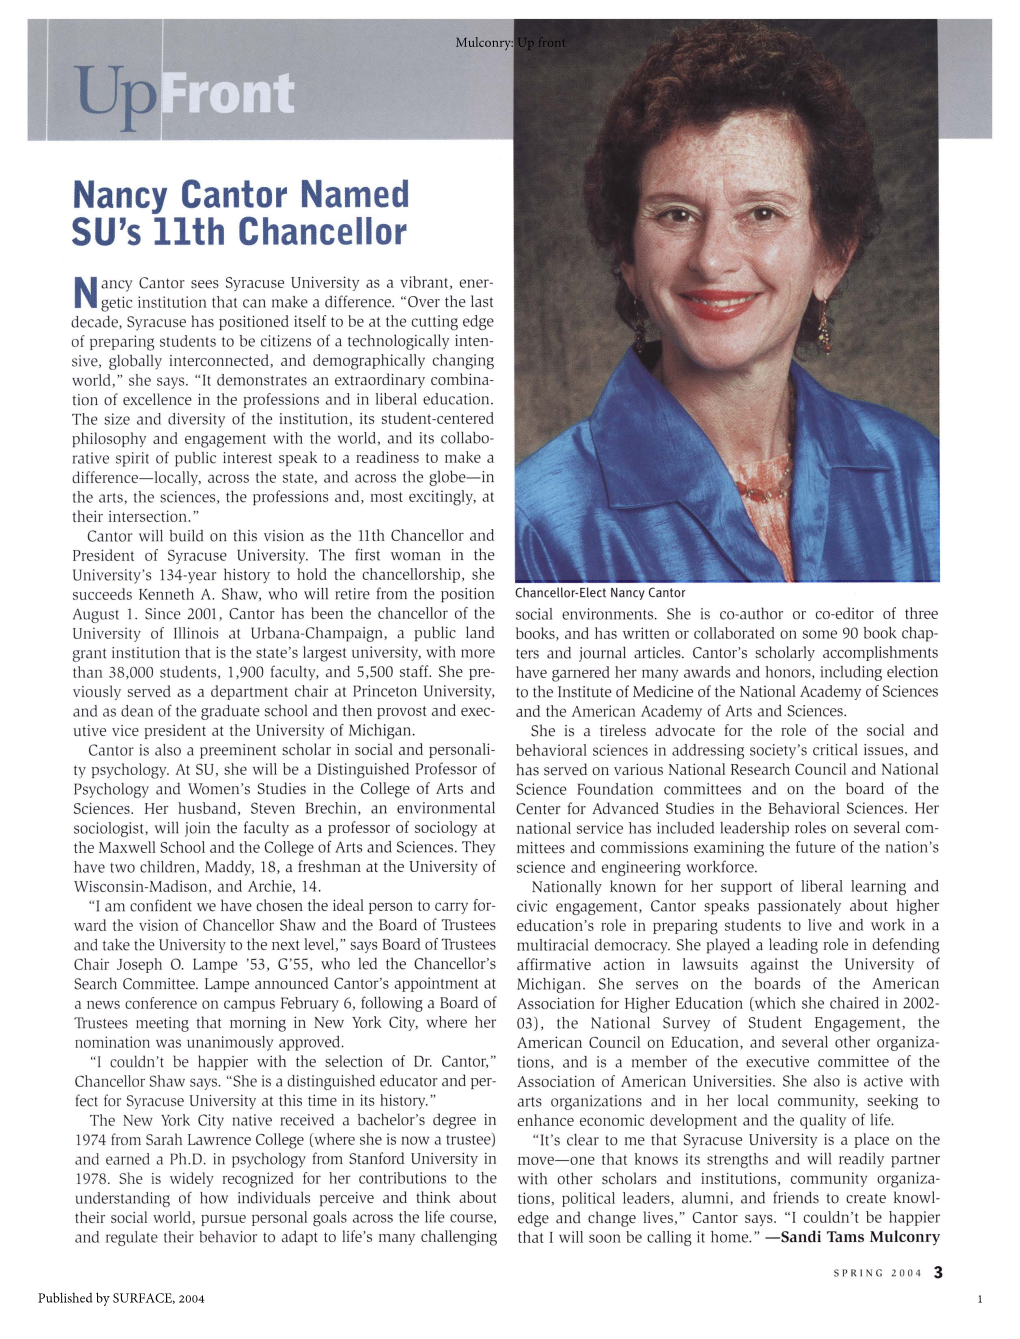 Nancy Cantor Named SU's 11Th Chancellor